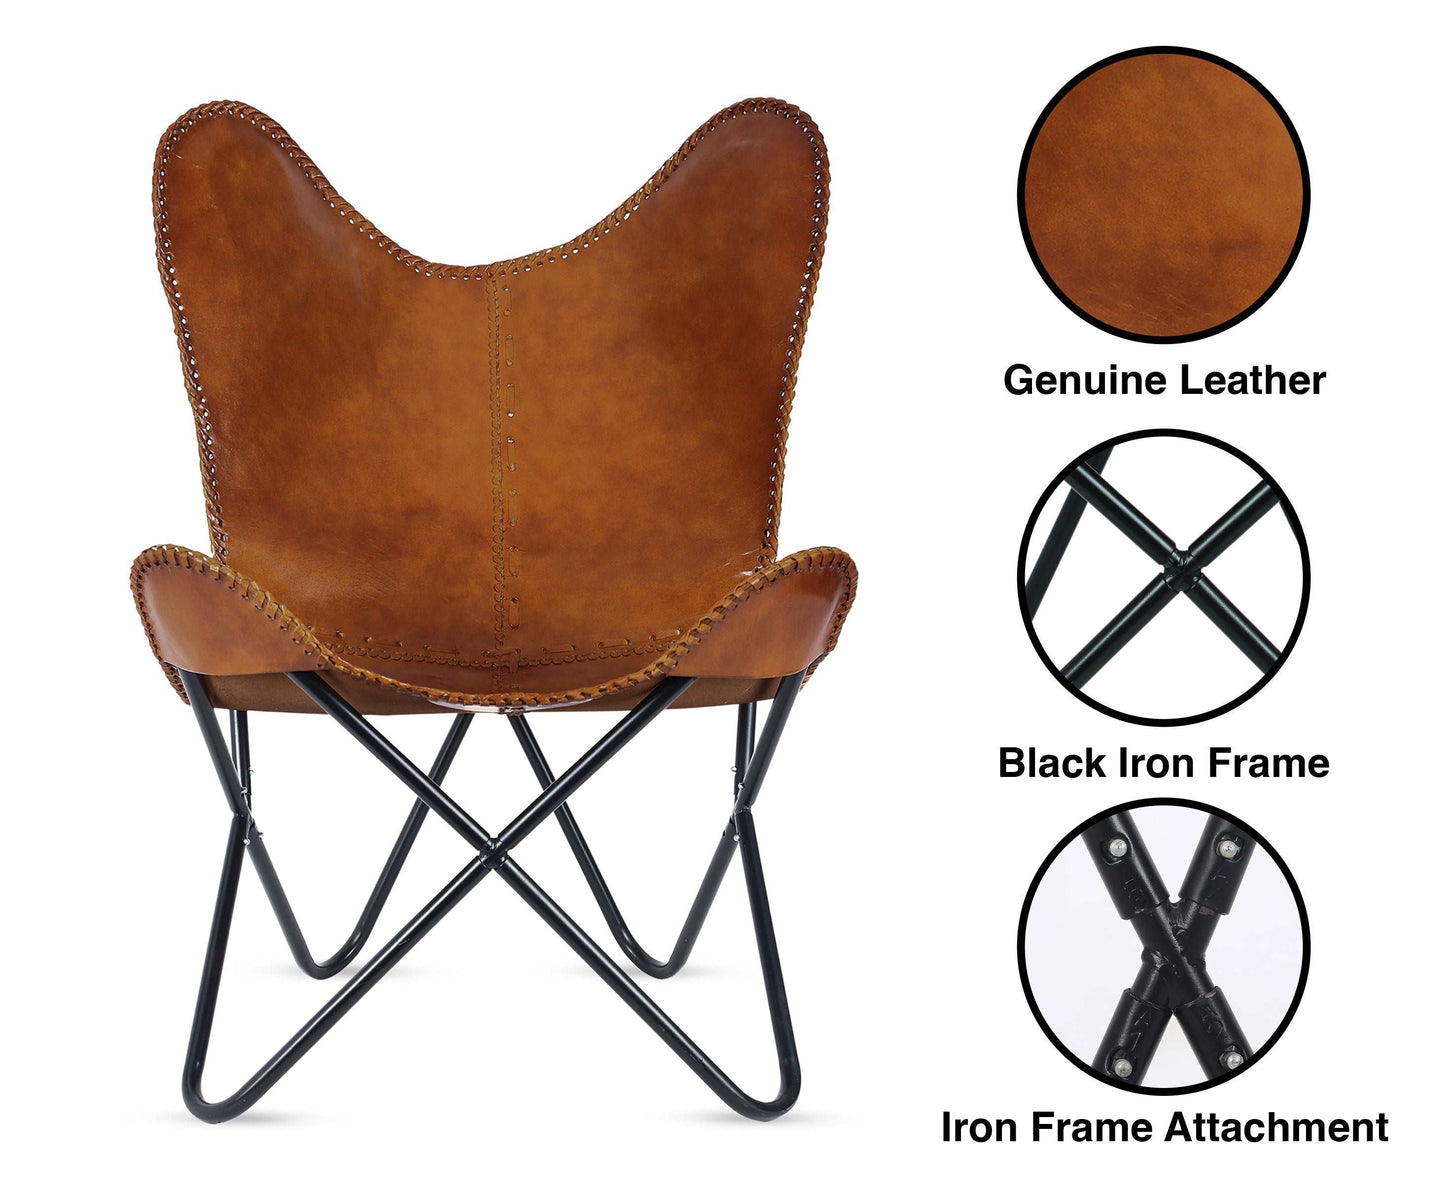 Leather Handmade Butterfly Chair with Folding Chair Stand leather living room chair leather butterfly chair